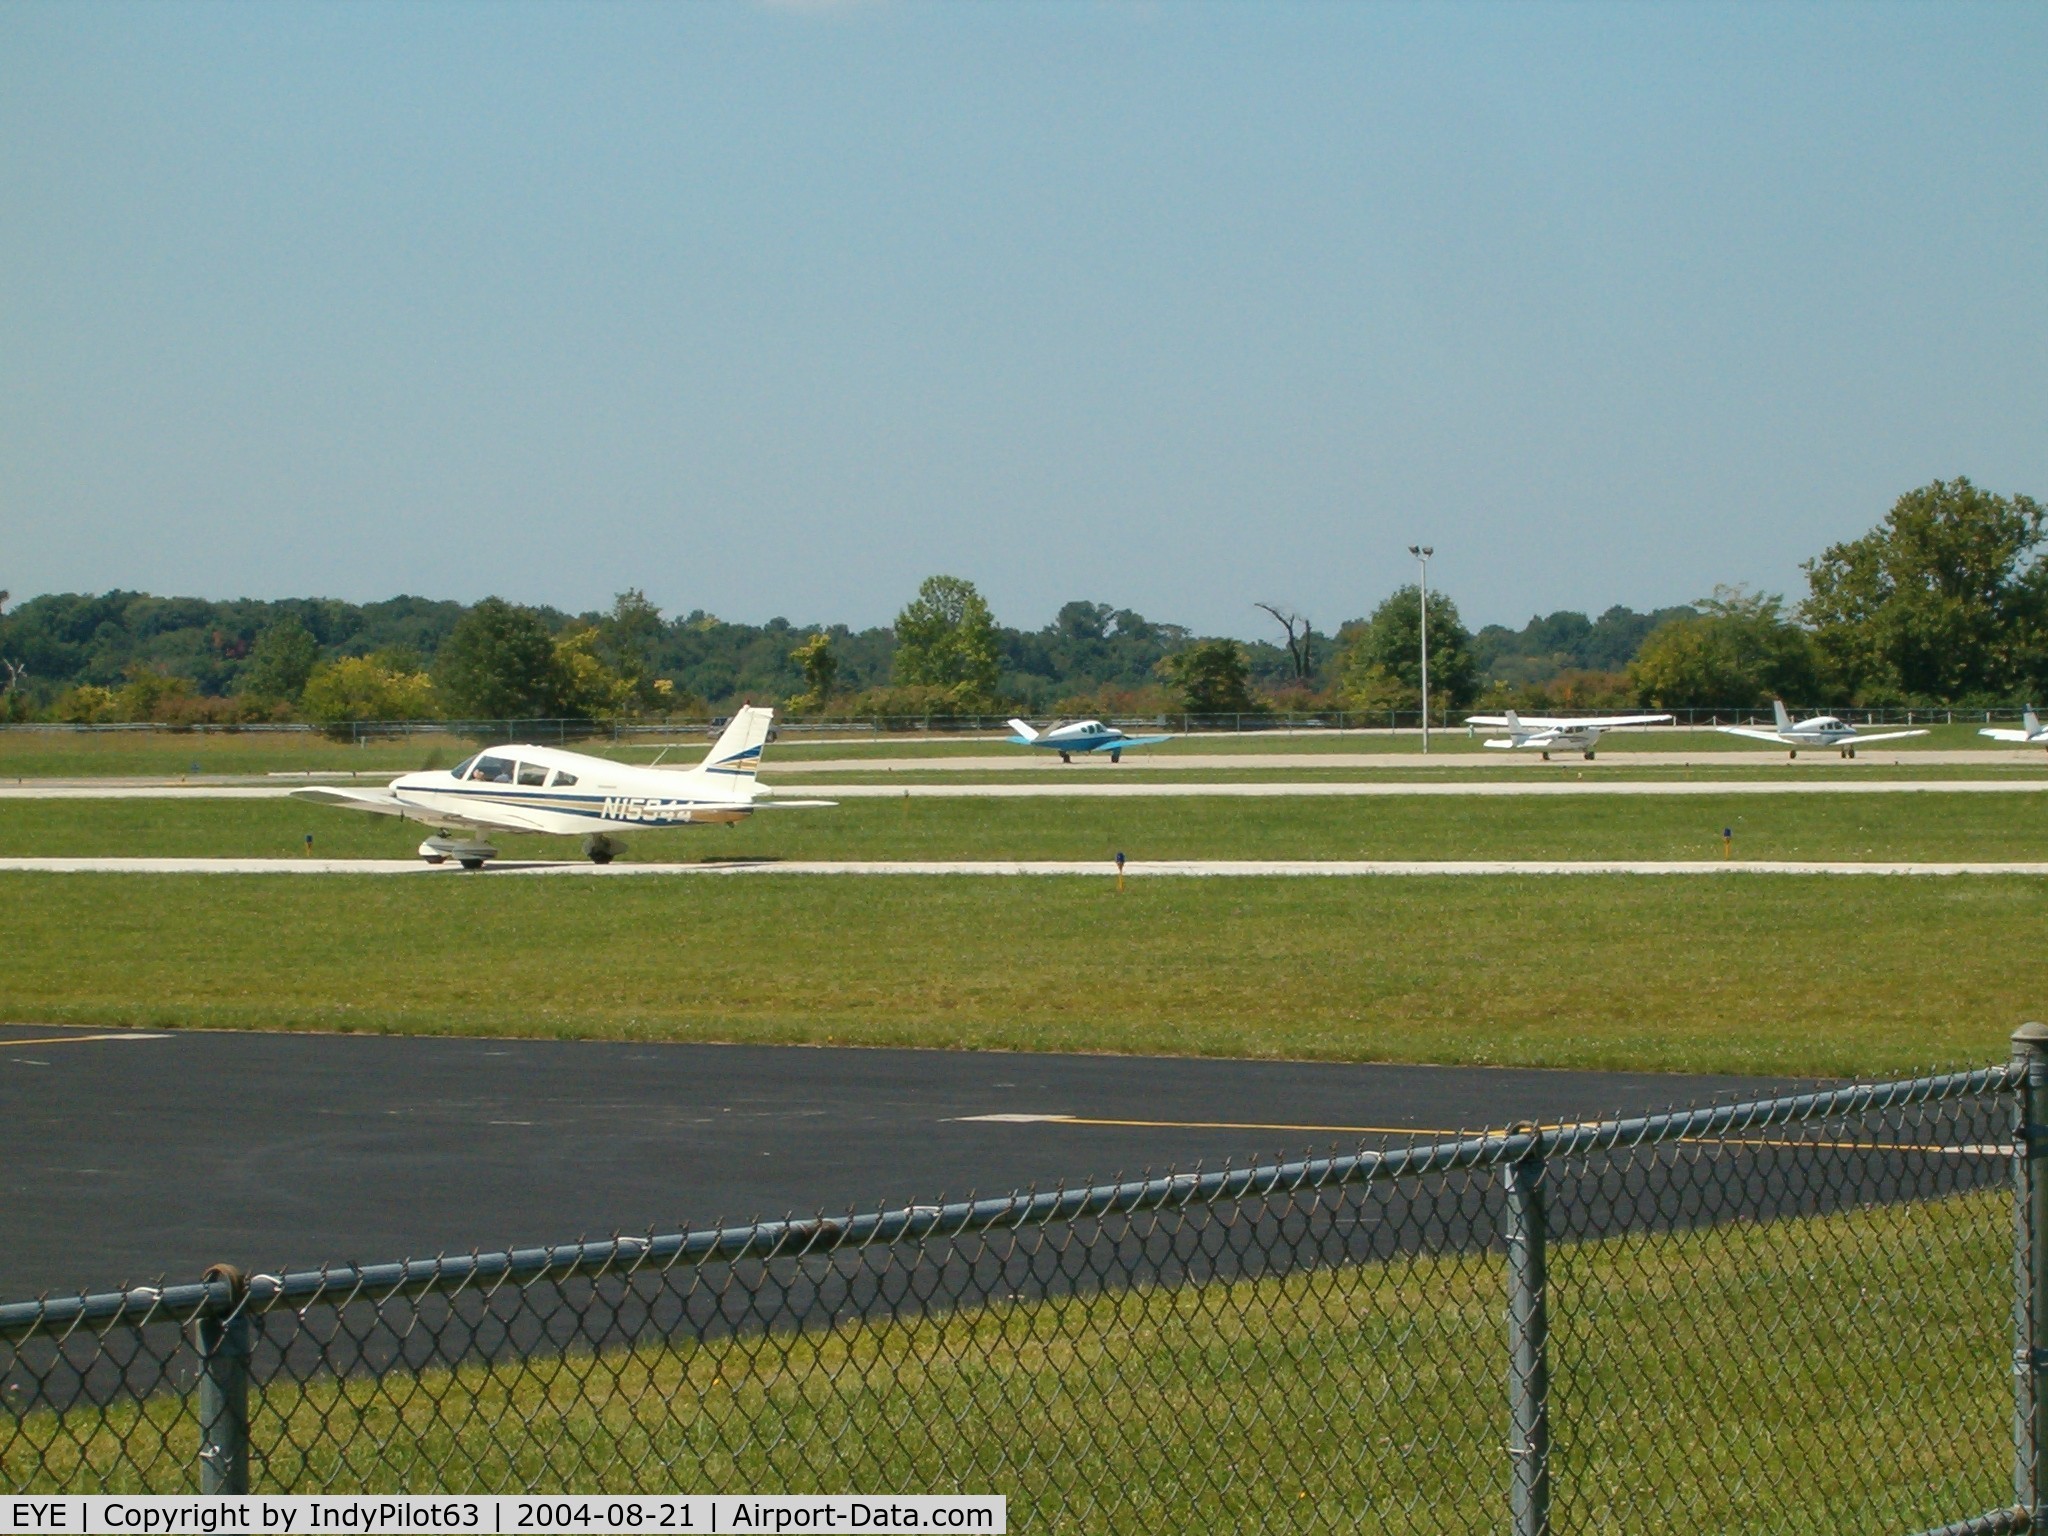 Eagle Creek Airpark Airport (EYE) - A view of runway 03 from the old Lakeside tarmac